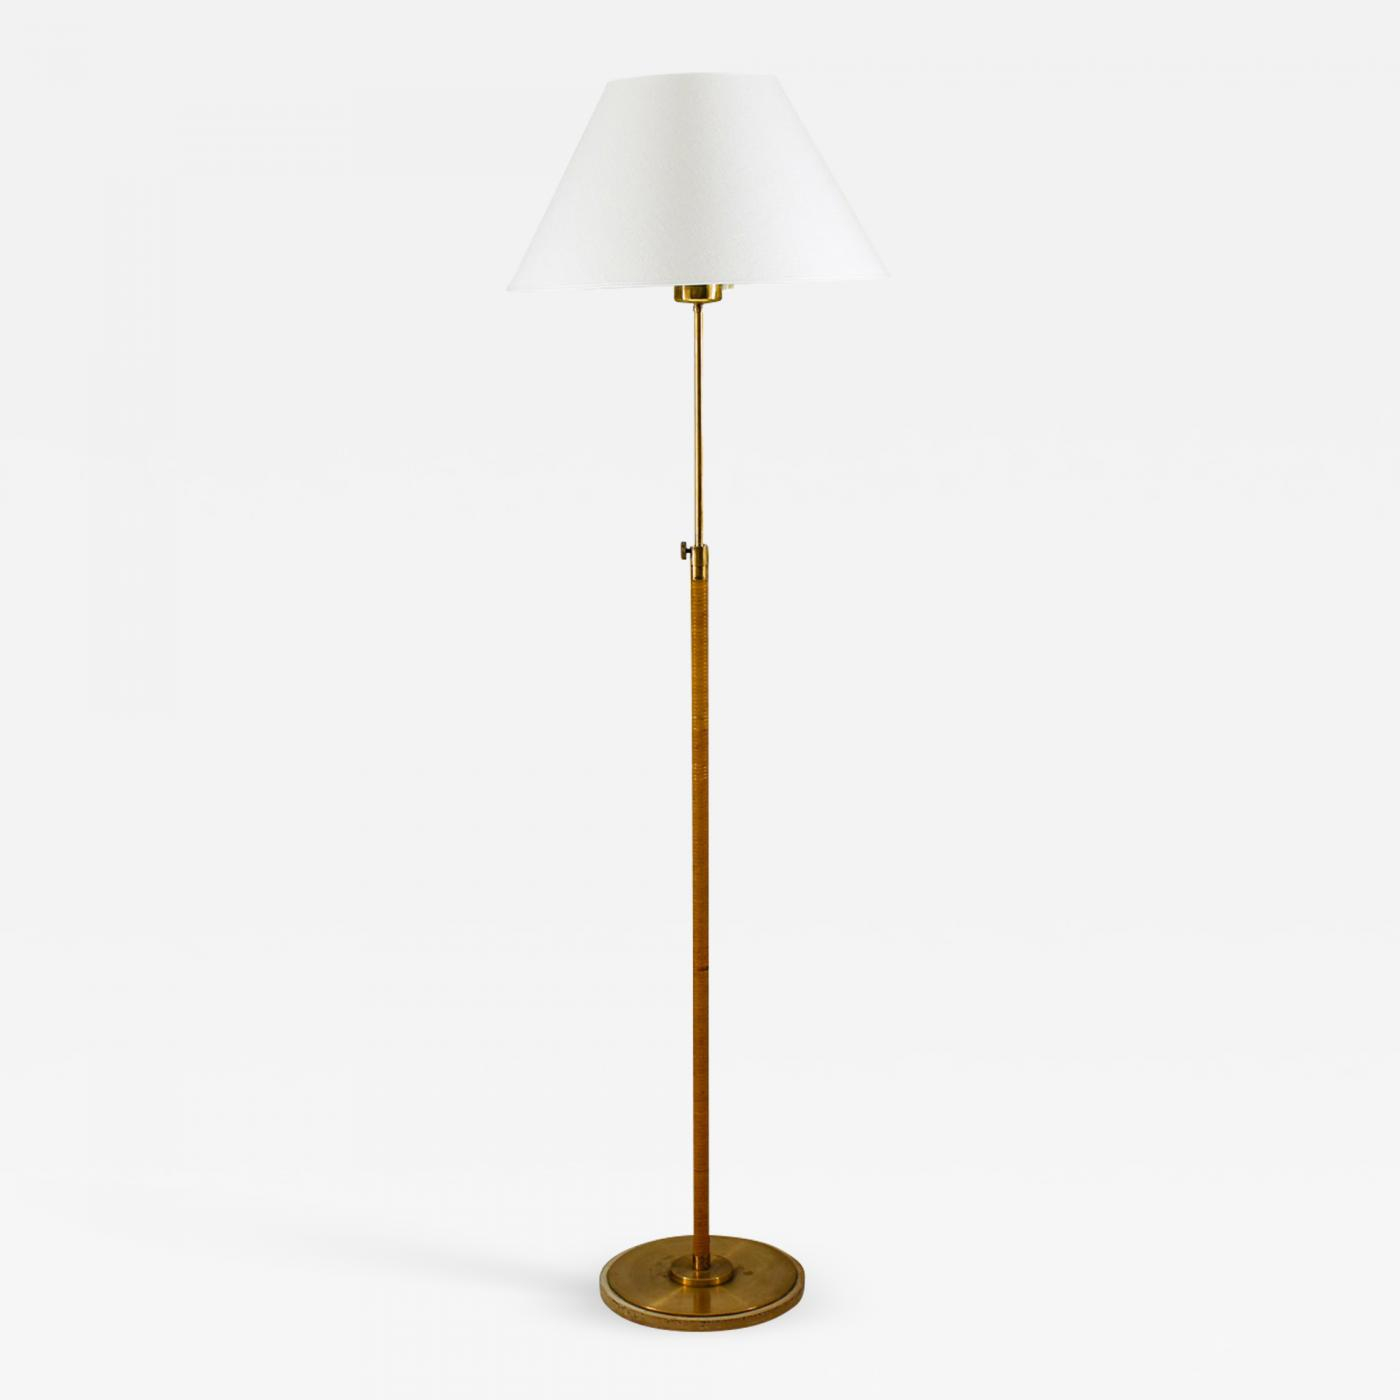 Swedish Modern Midcentury Floor Lamp In Brass And Rattan 1940s within dimensions 1400 X 1400